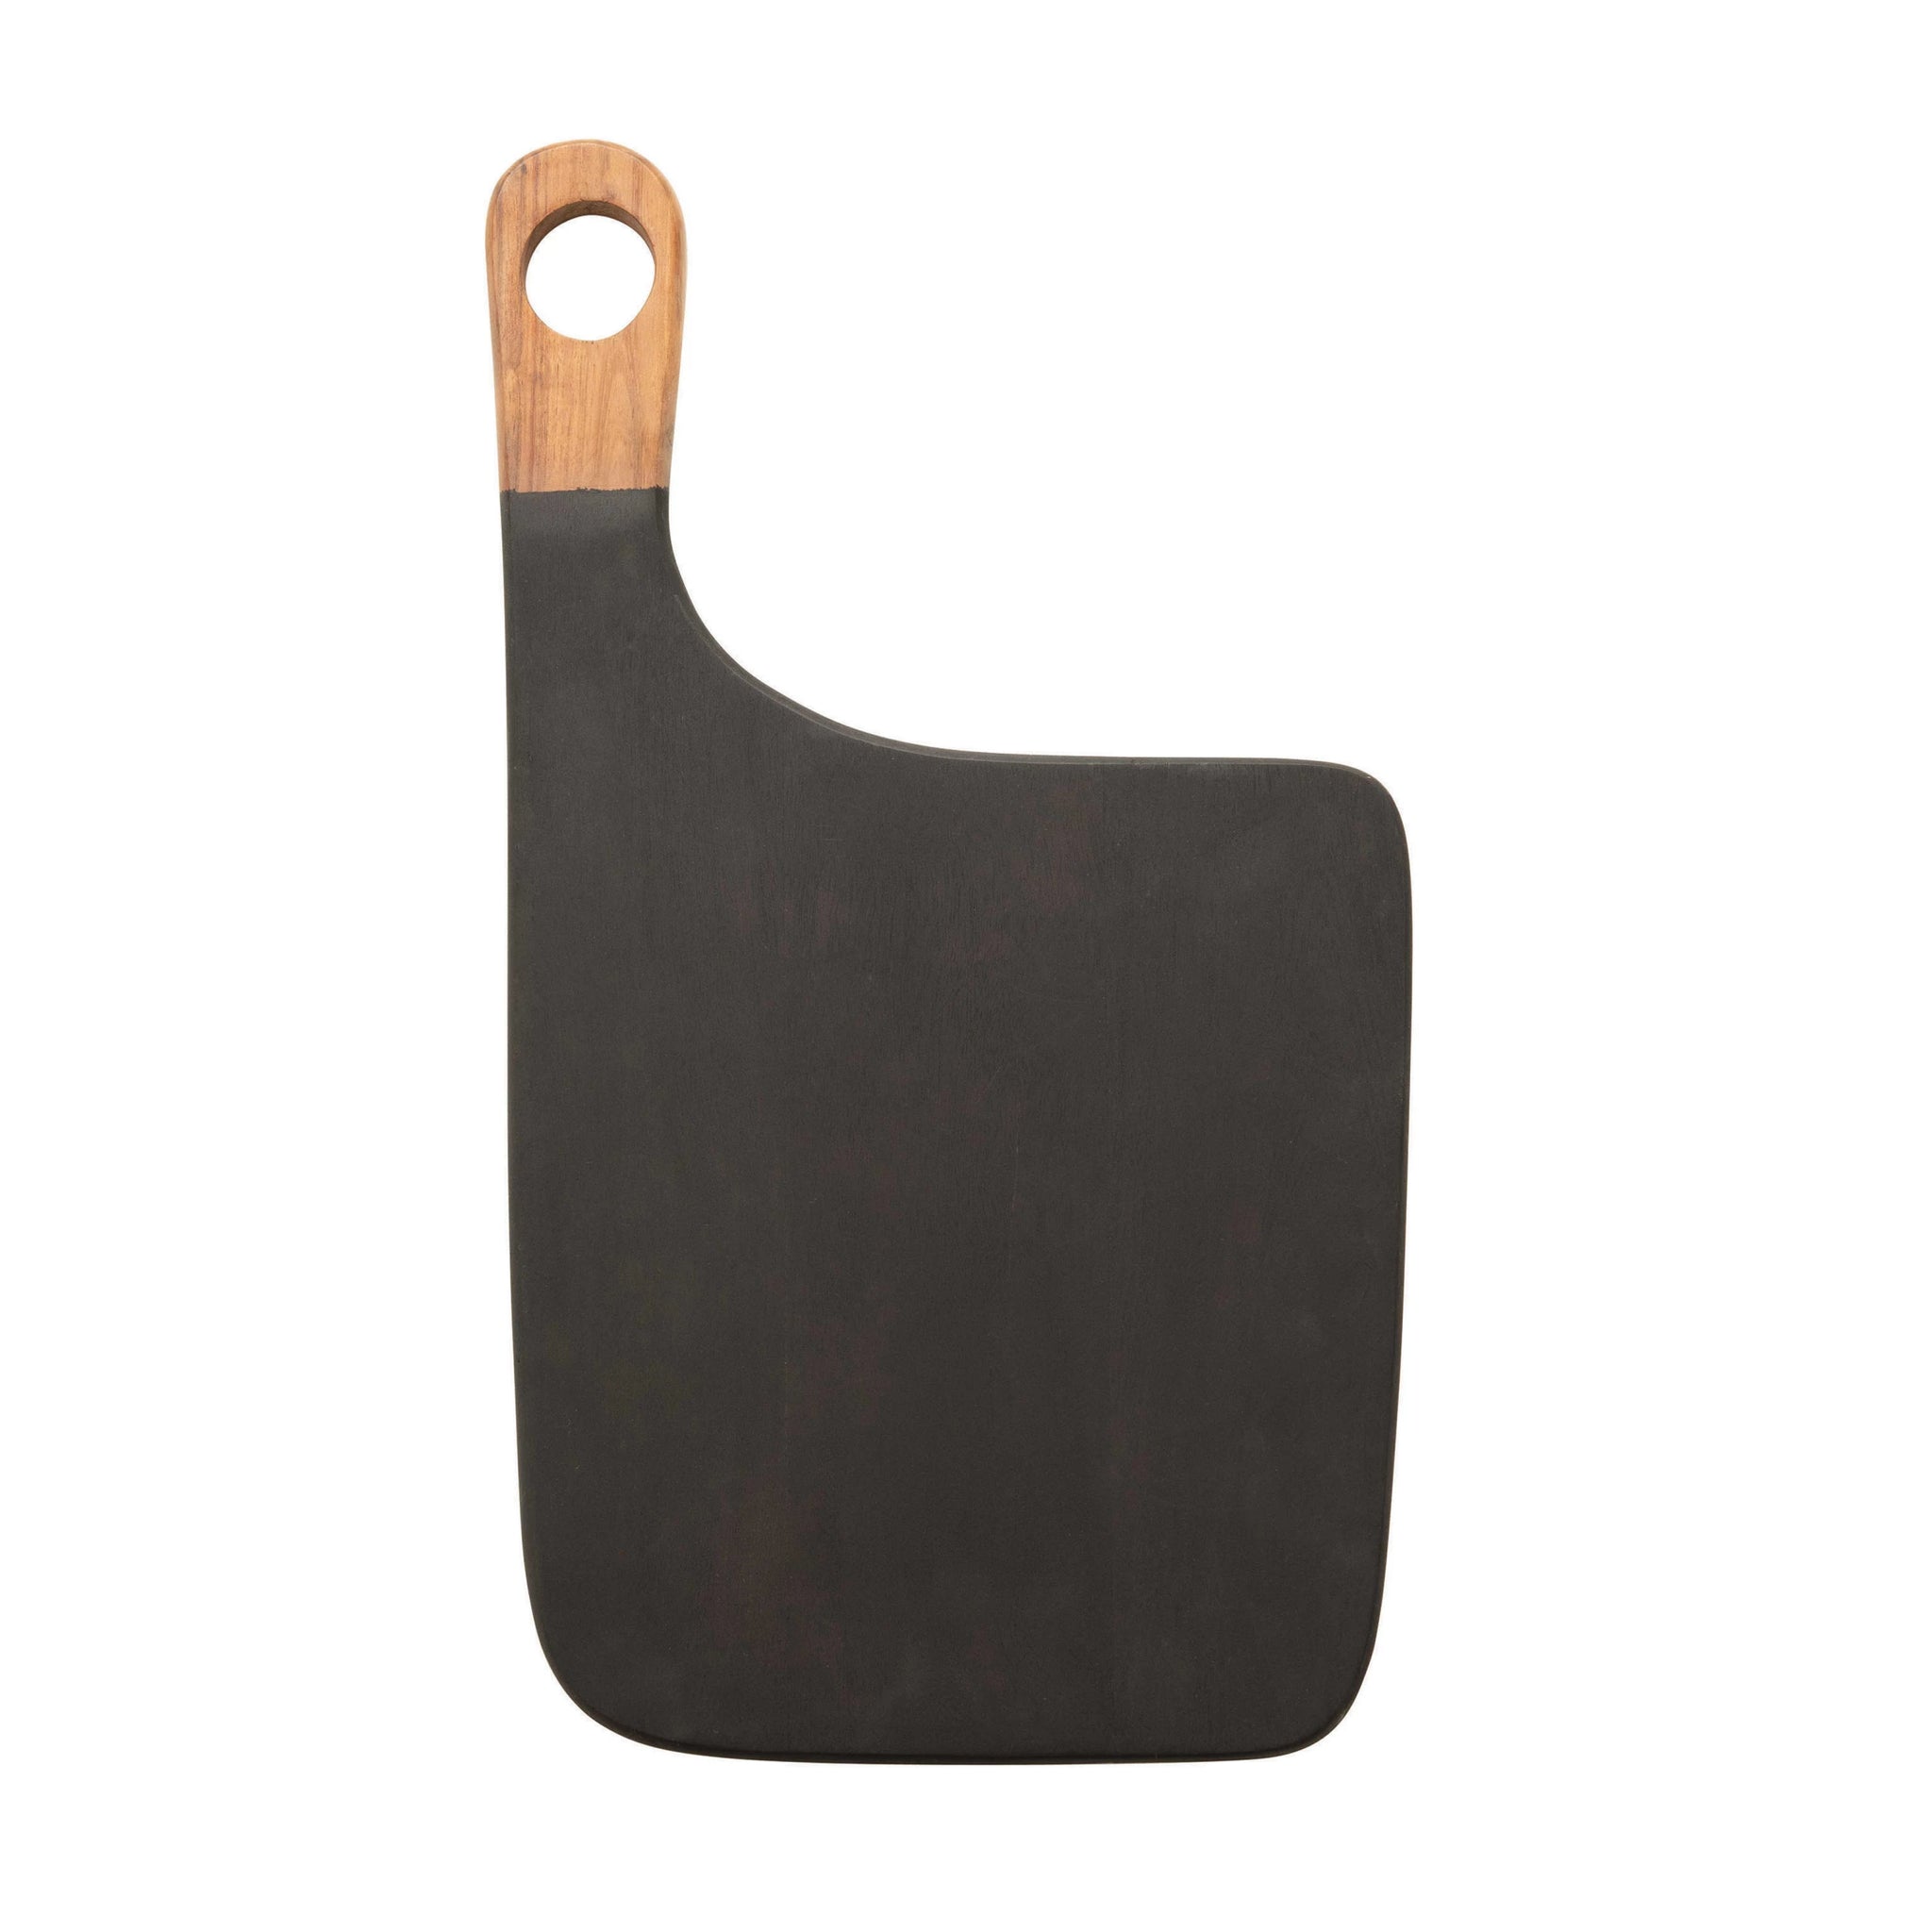 Cheese/Cutting Board with Handle